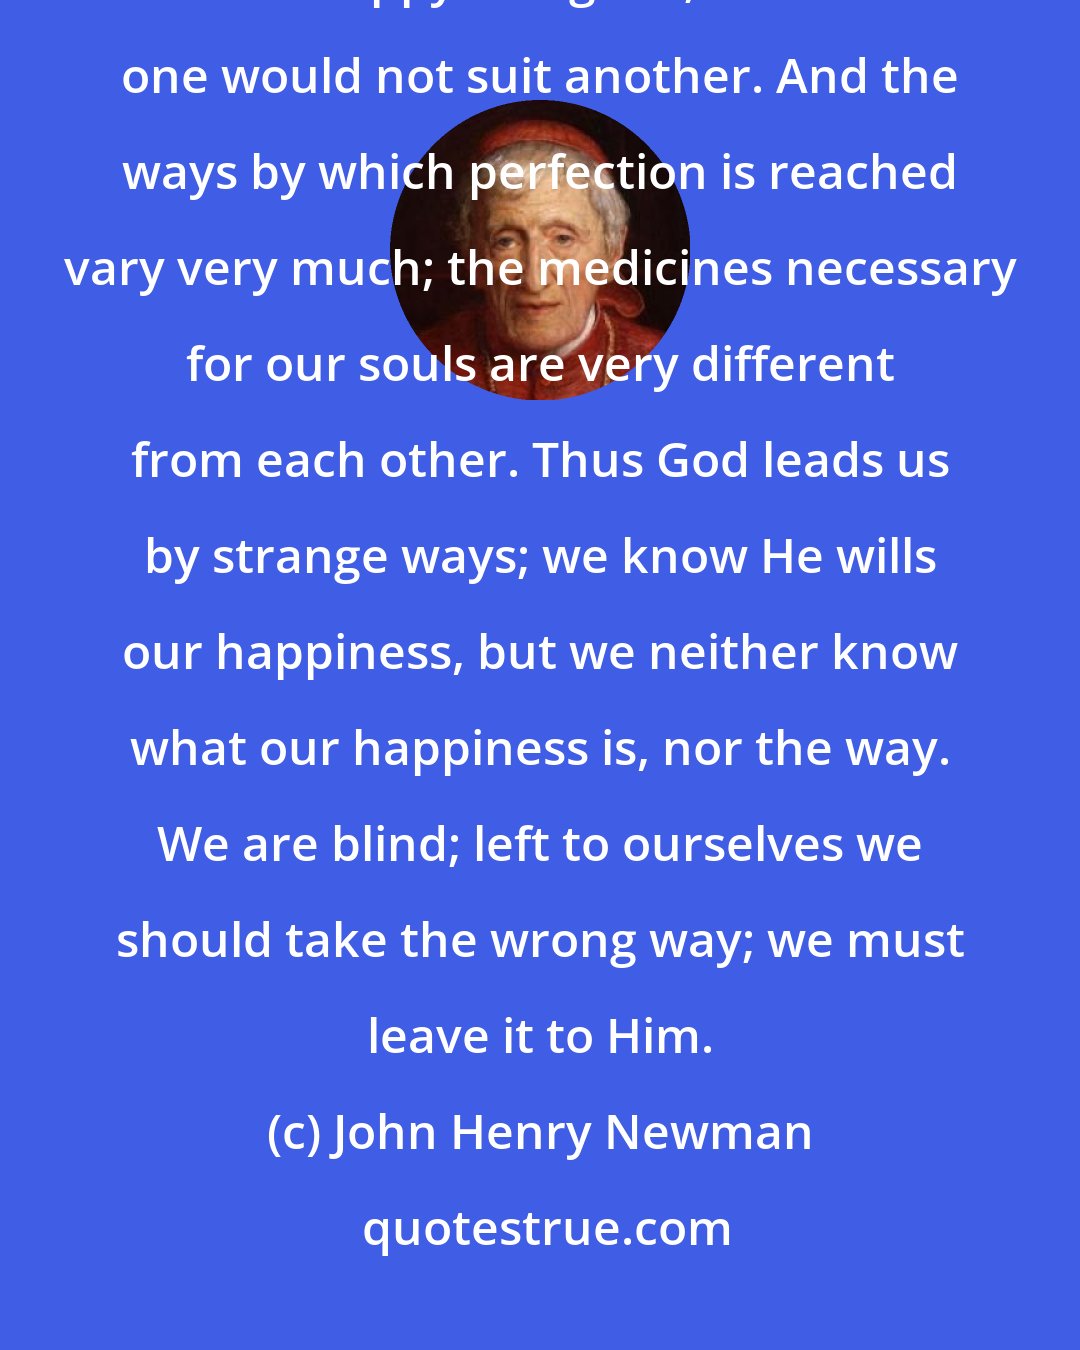 John Henry Newman: God knows what is my greatest happiness, but I do not. There is no rule about what is happy and good; what suits one would not suit another. And the ways by which perfection is reached vary very much; the medicines necessary for our souls are very different from each other. Thus God leads us by strange ways; we know He wills our happiness, but we neither know what our happiness is, nor the way. We are blind; left to ourselves we should take the wrong way; we must leave it to Him.